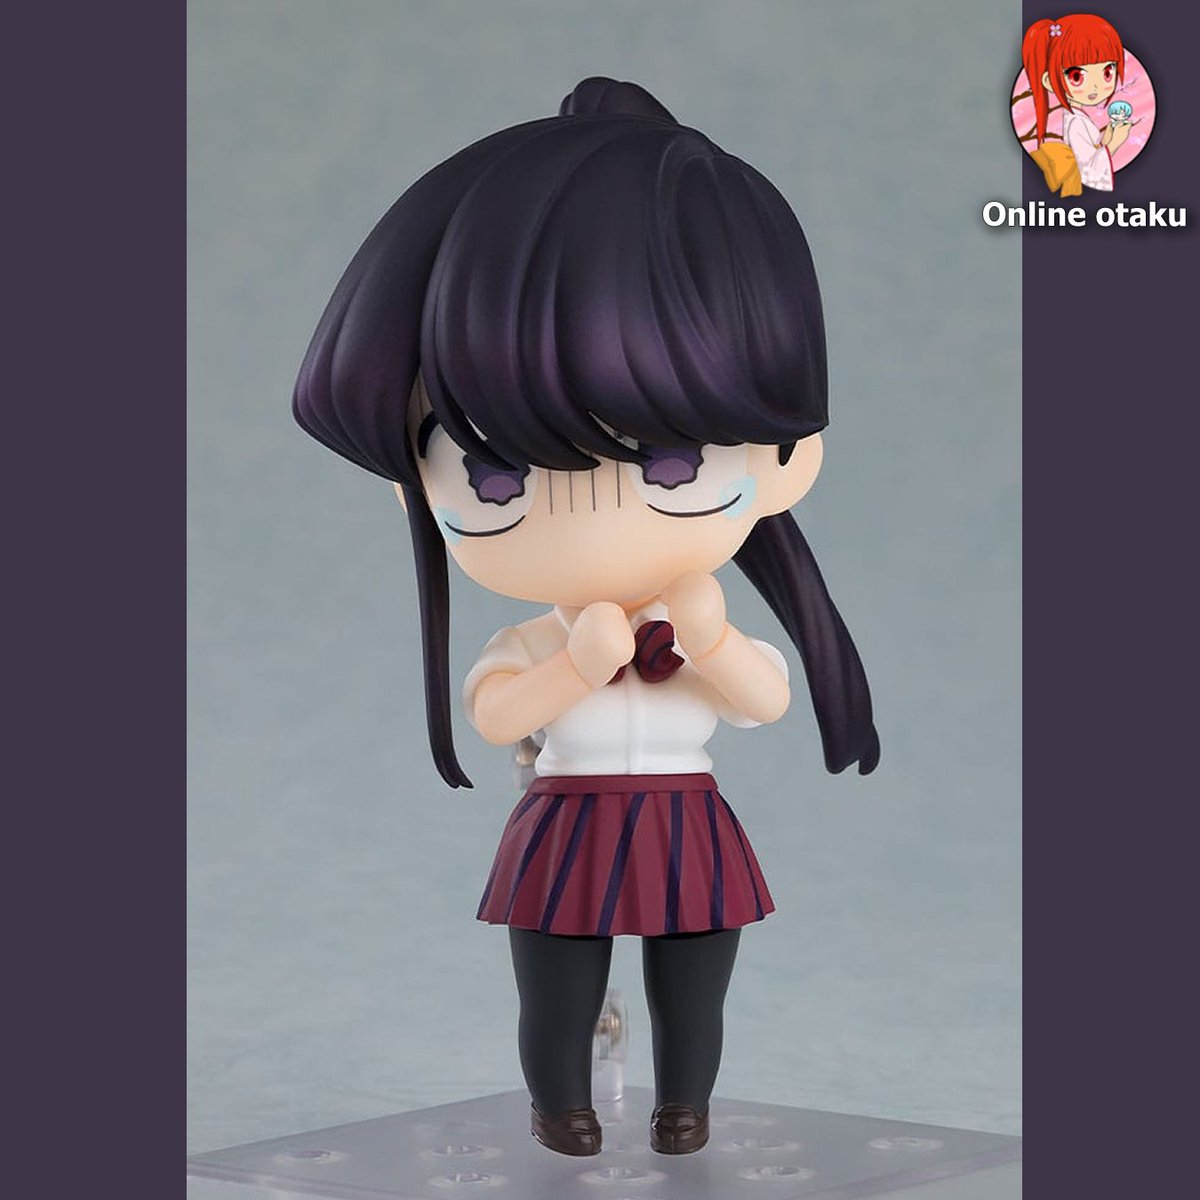 💬 Express yourself with our Komi Can't Communicate Nendoroid Action Figure of Shoko Komi in Ponytail Ver! Order now to bring this adorable figure to your collection: online-otaku.com/en/shop/item/2… #KomiCantCommunicate #ShokoKomi #Nendoroid #OnlineOtaku #AnimeFigure #FigureCollection